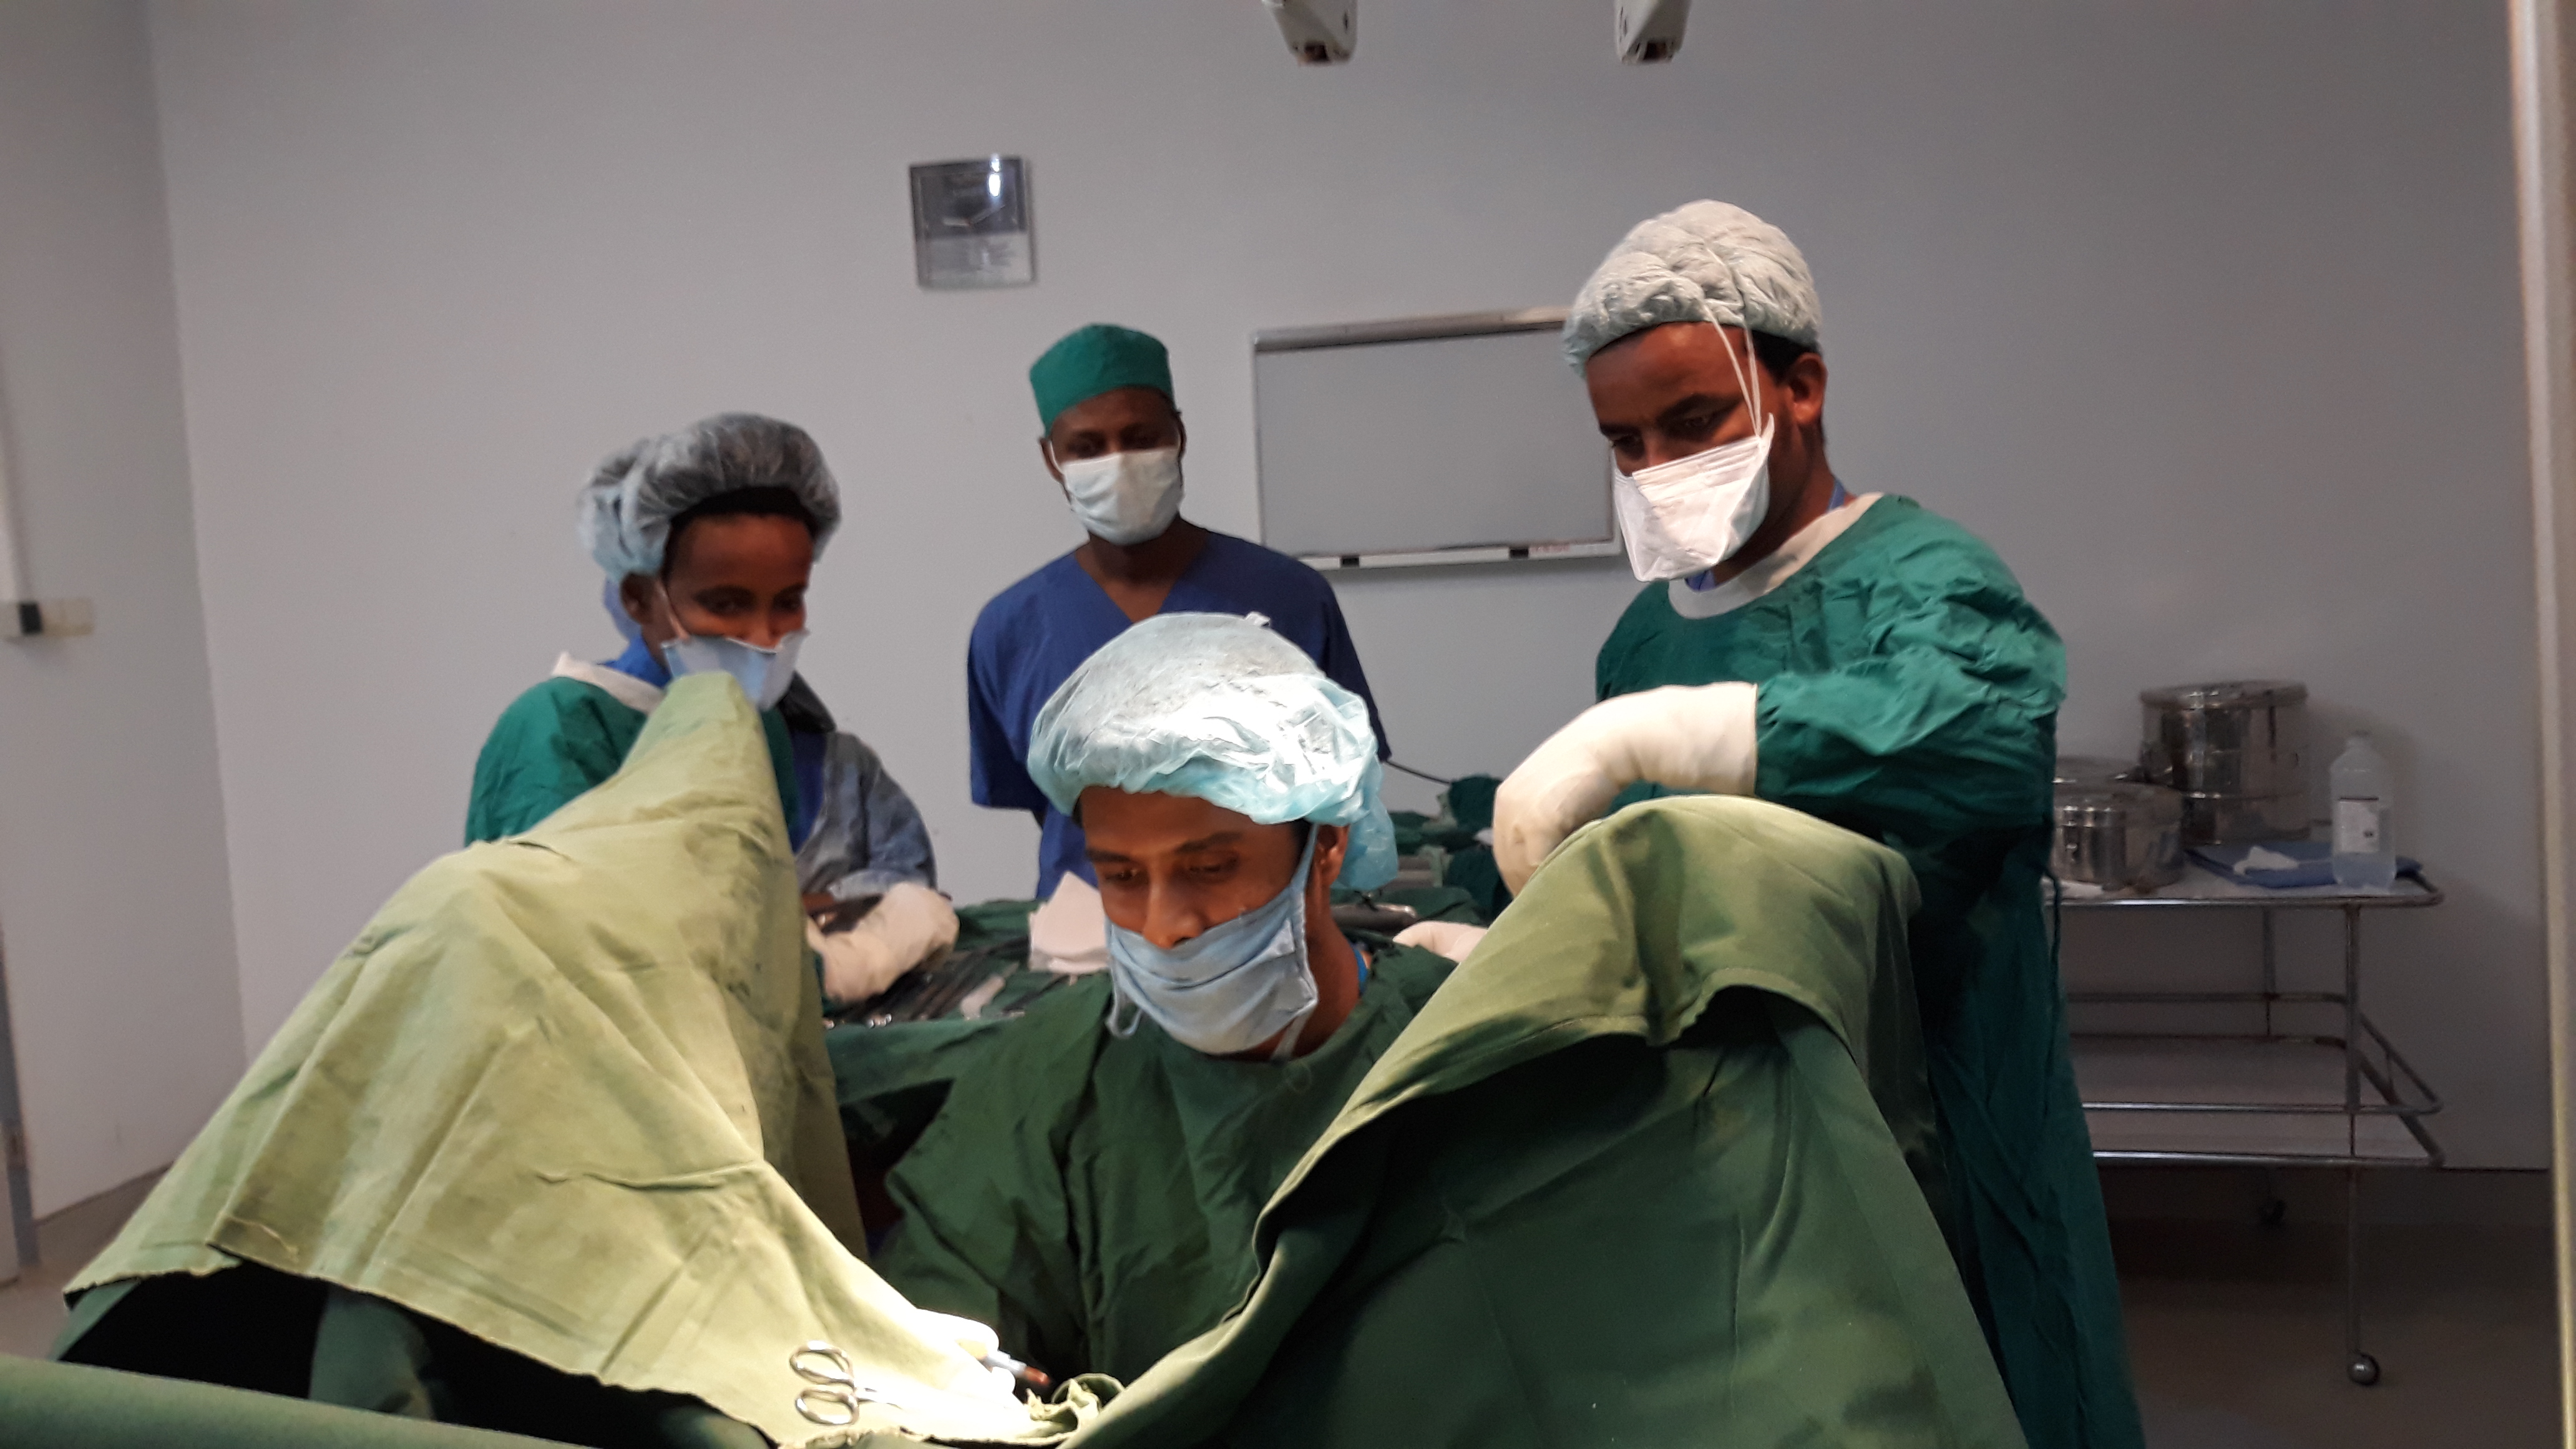 Sailes performing C-section supported by his Eritrean colleagues